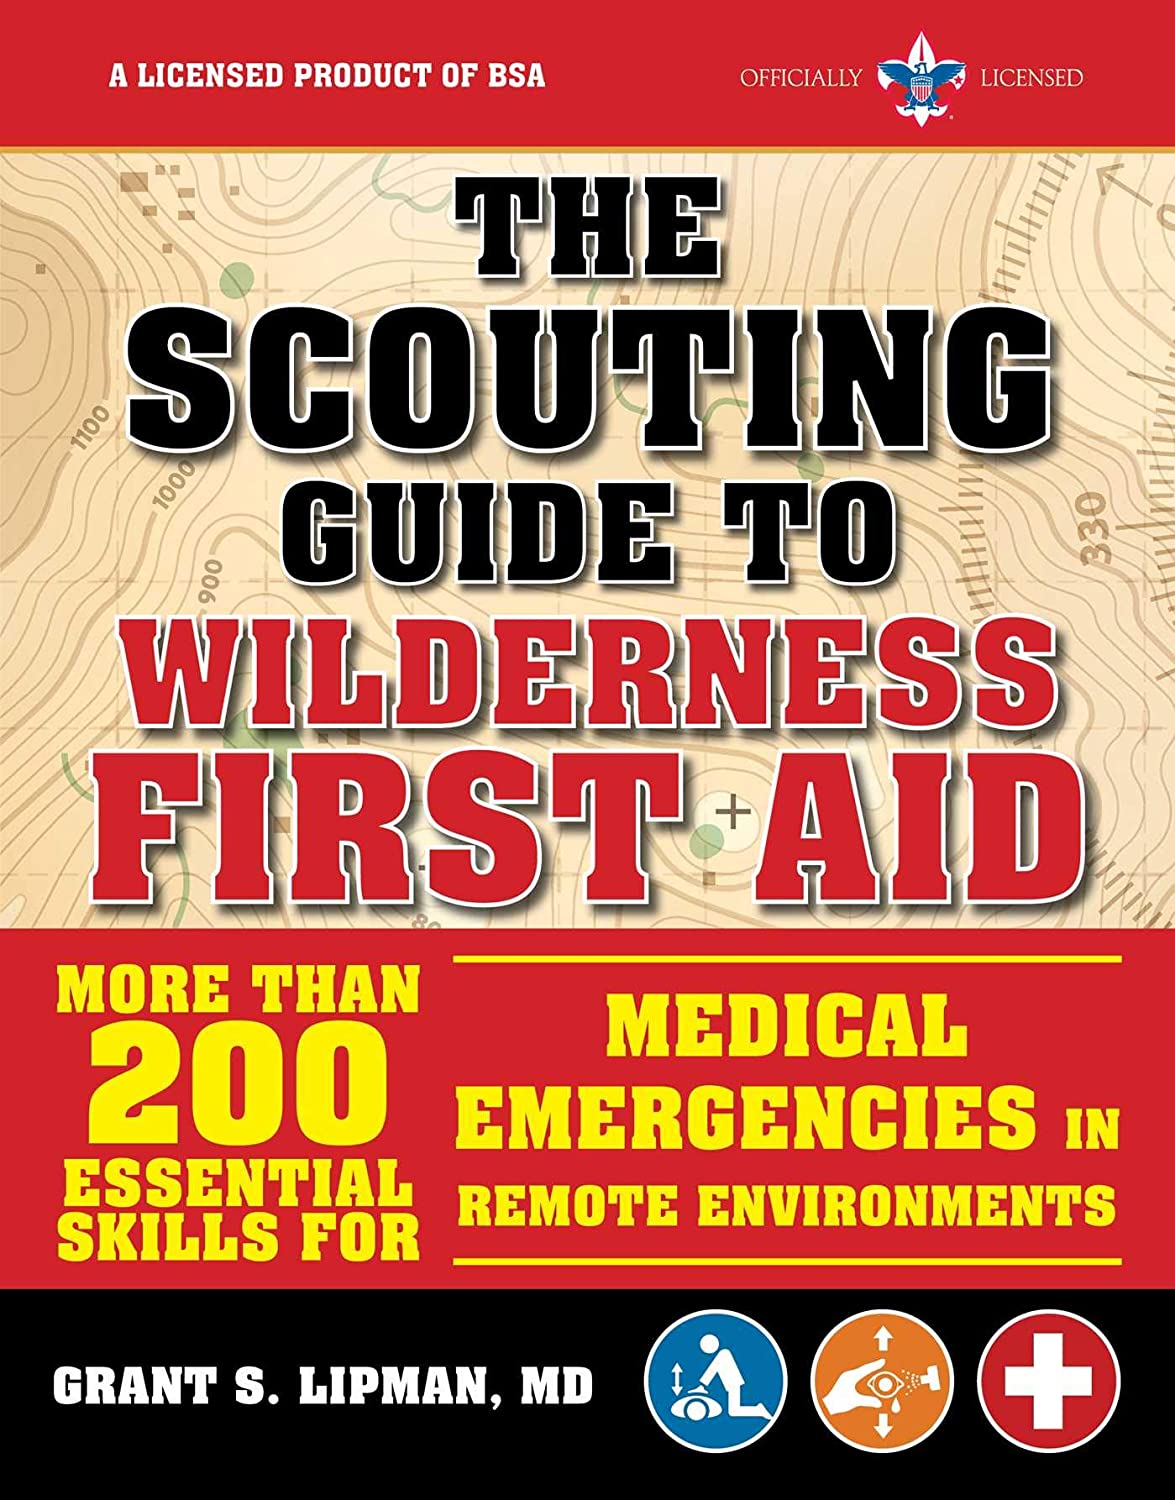 The Scouting Guide to Wilderness First Aid: An Officially-Licensed Book of the Boy Scouts of America: More than 200 Essential Skills for Medical … in Remote Environments (A BSA Scouting Guide)